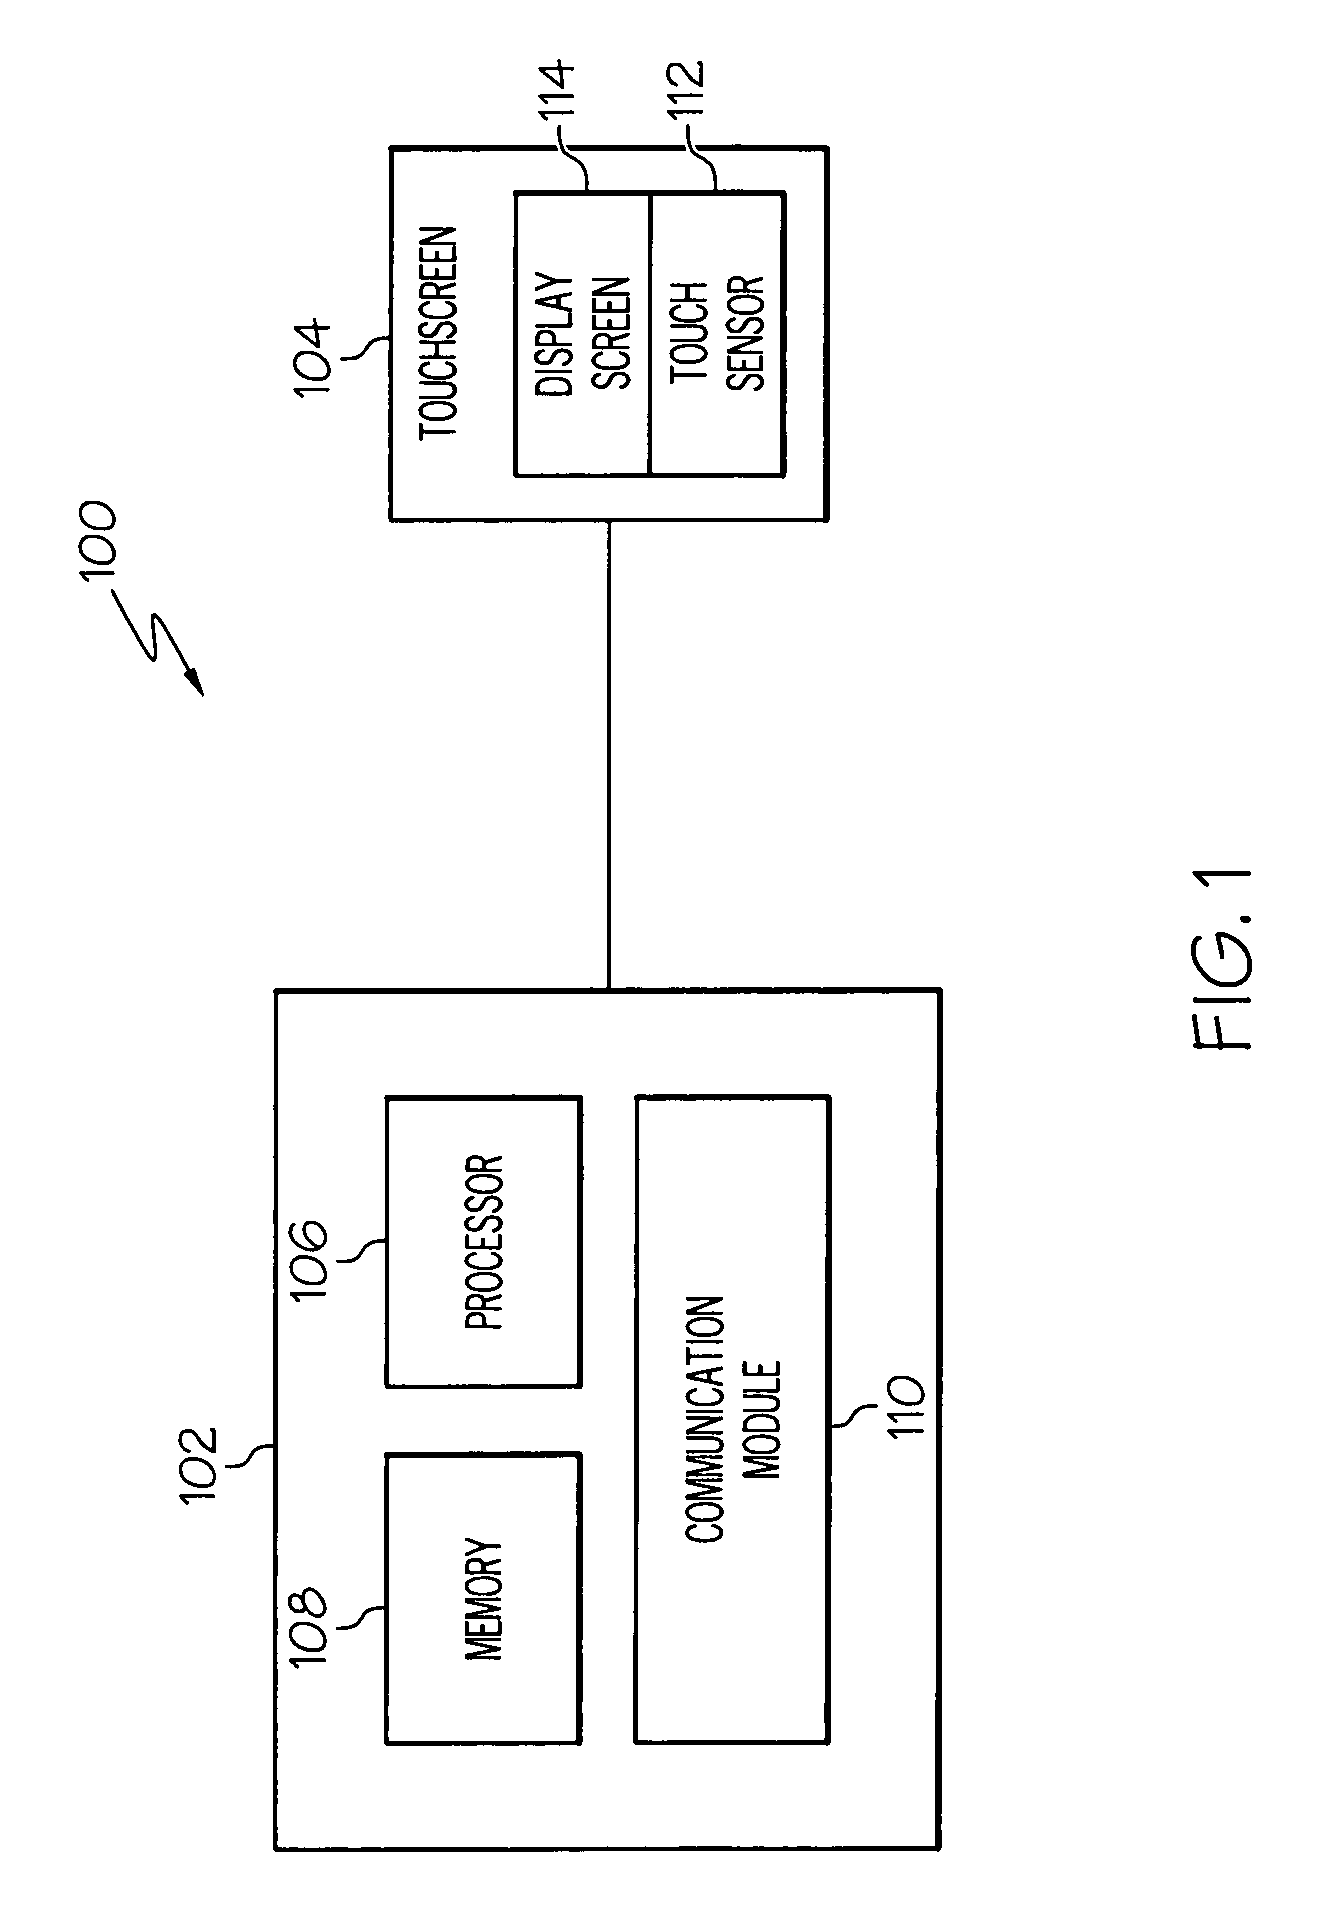 System and method for adjusting a value using a touchscreen slider